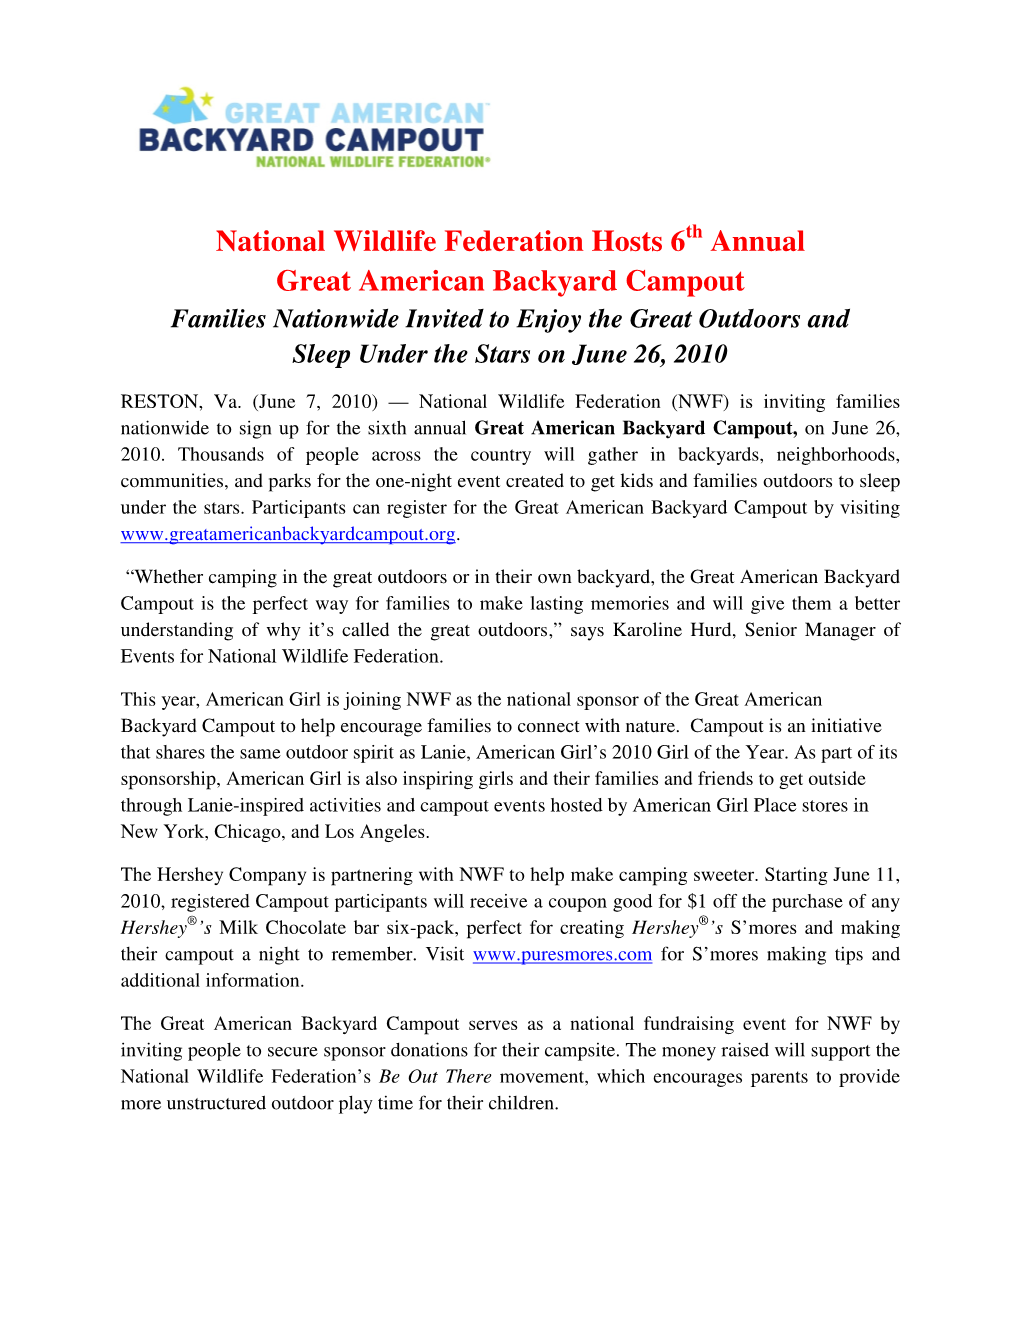 National Wildlife Federation Hosts 6 Annual Great American Backyard Campout